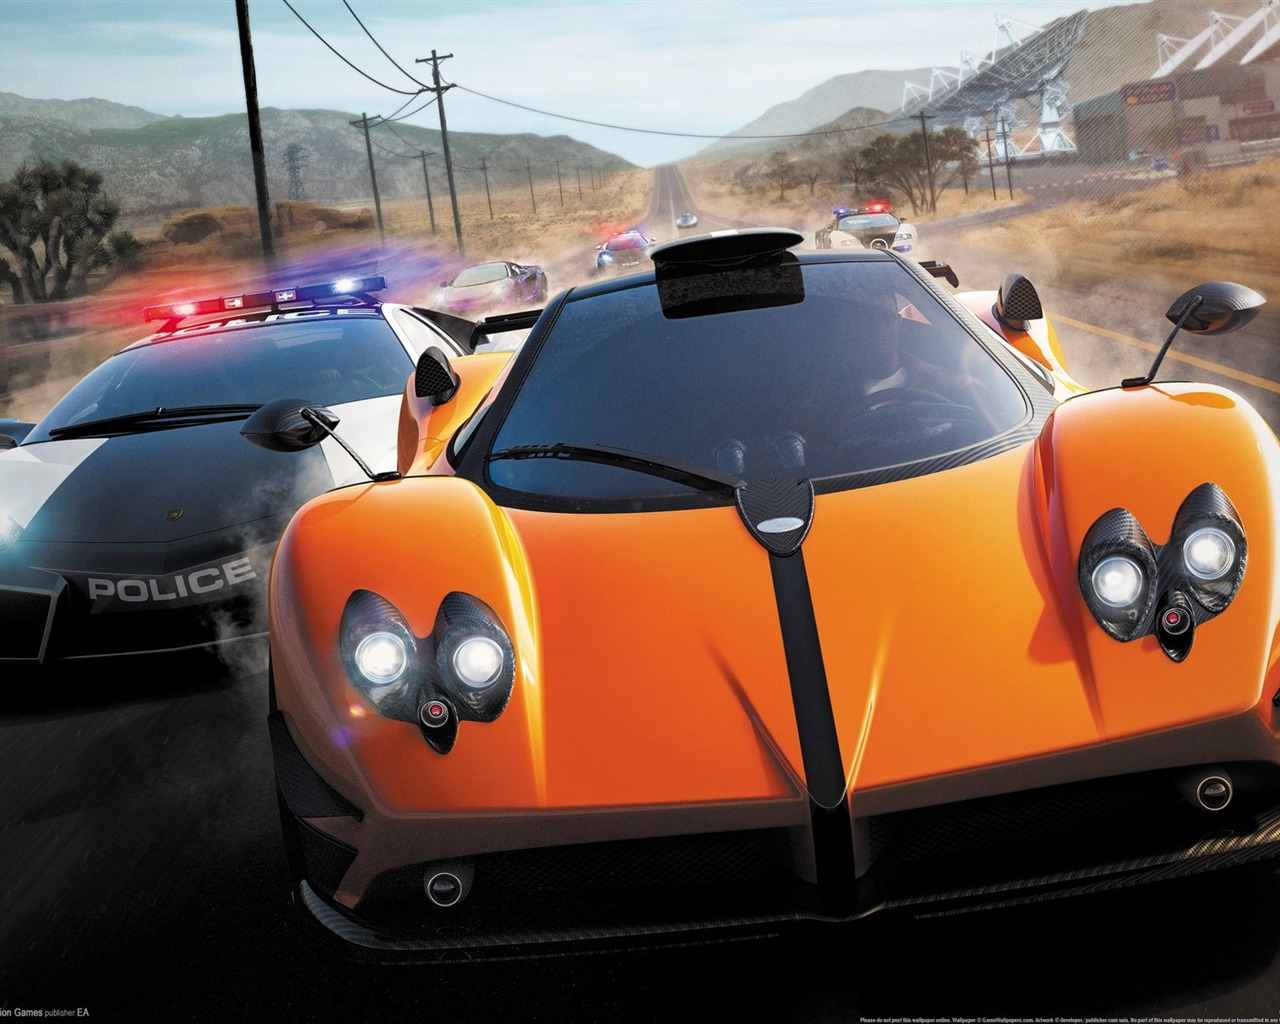 Need for Speed: Hot Pursuit 極品飛車14：熱力追踪 #2 - 1280x1024